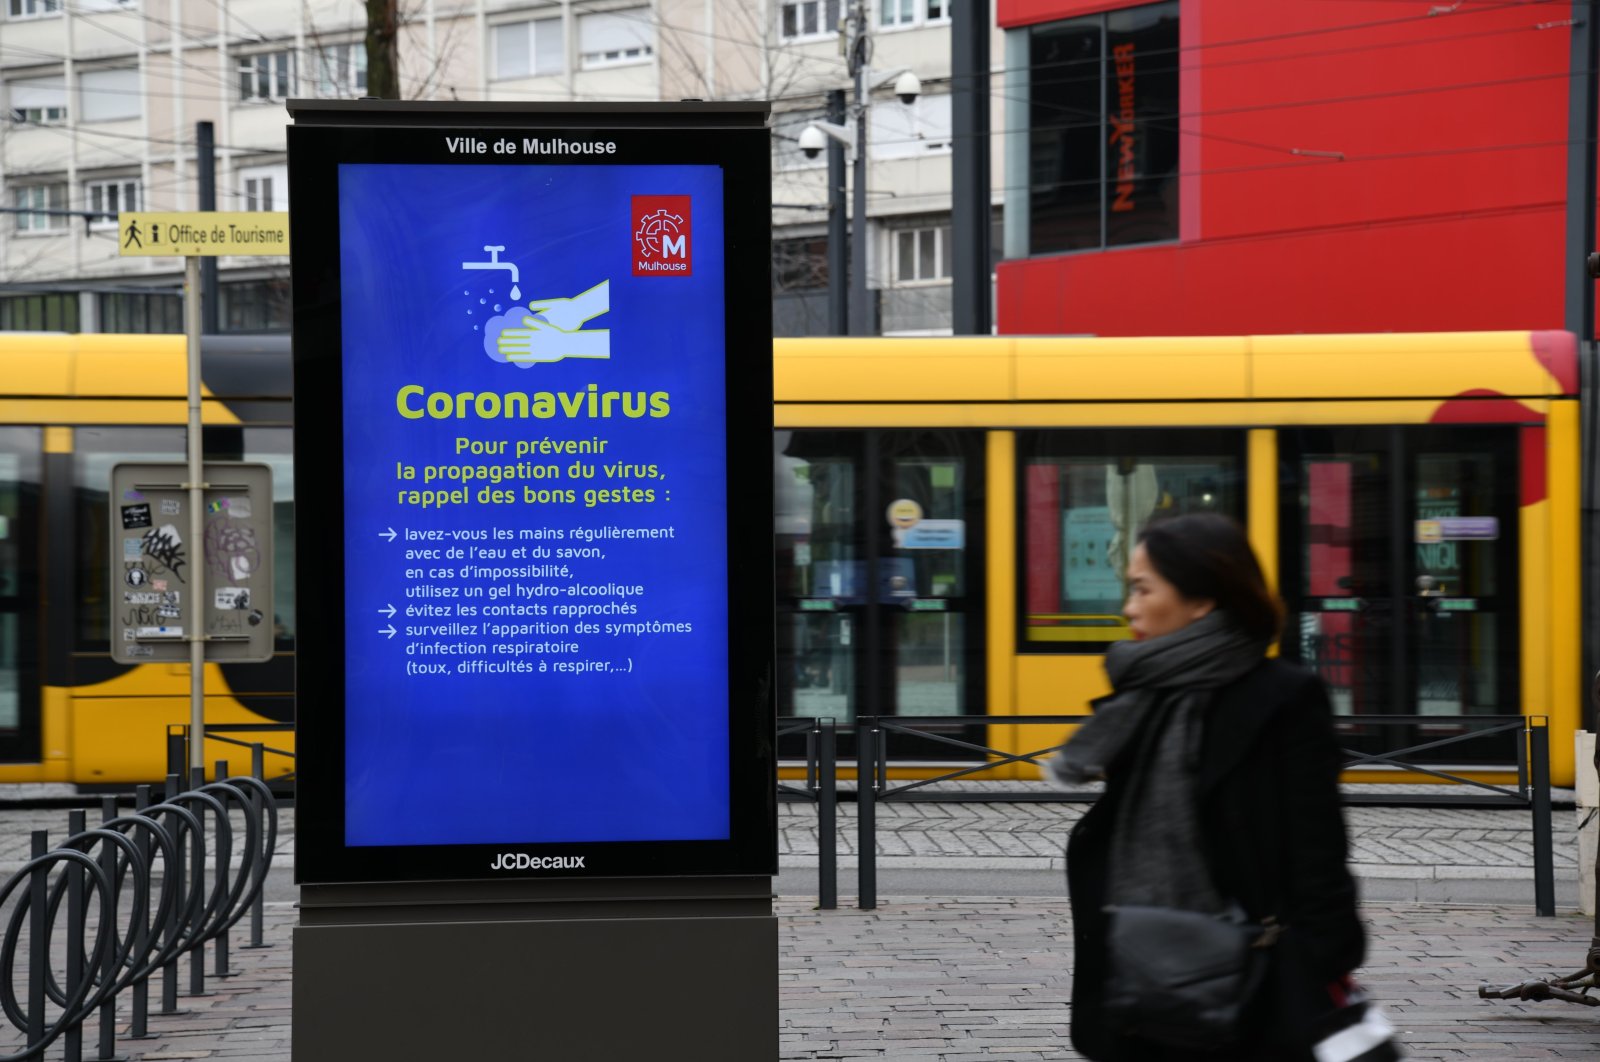 A woman walks past a screen displaying information on precautionary measures to reduce the risk of spreading COVID-19, the new coronavirus, on March 6, 2020, in Mulhouse, eastern France. (AFP Photo)